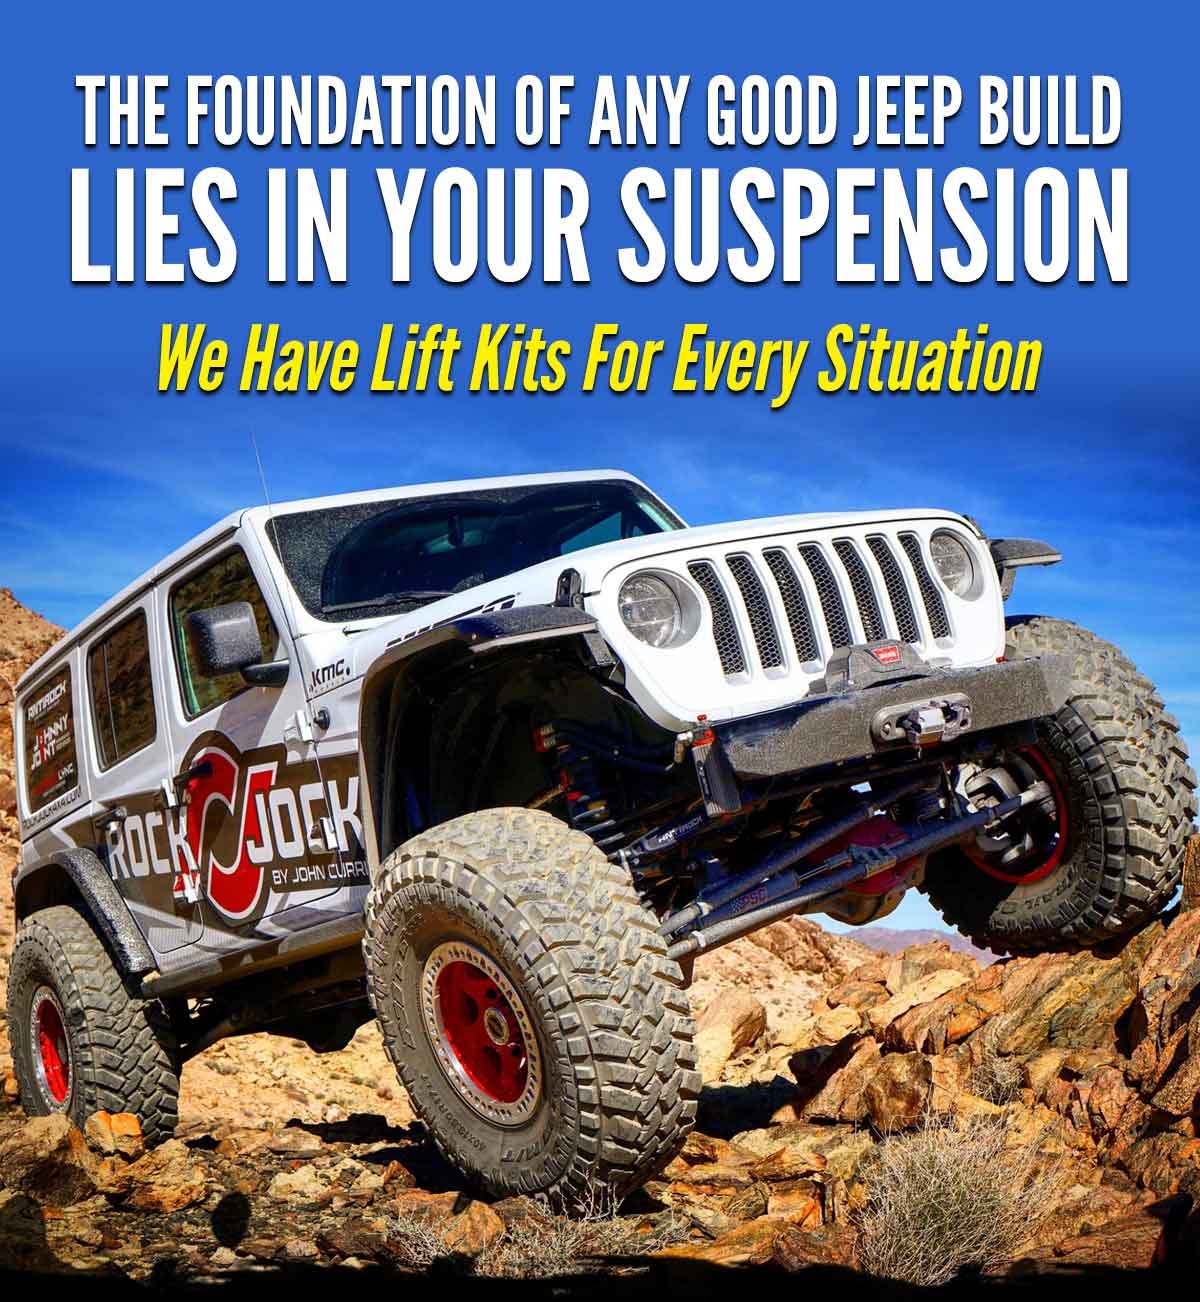 The Foundation Of Any Good Jeep Build Lies In Your Suspension We Have Lift Kits For Every Situation